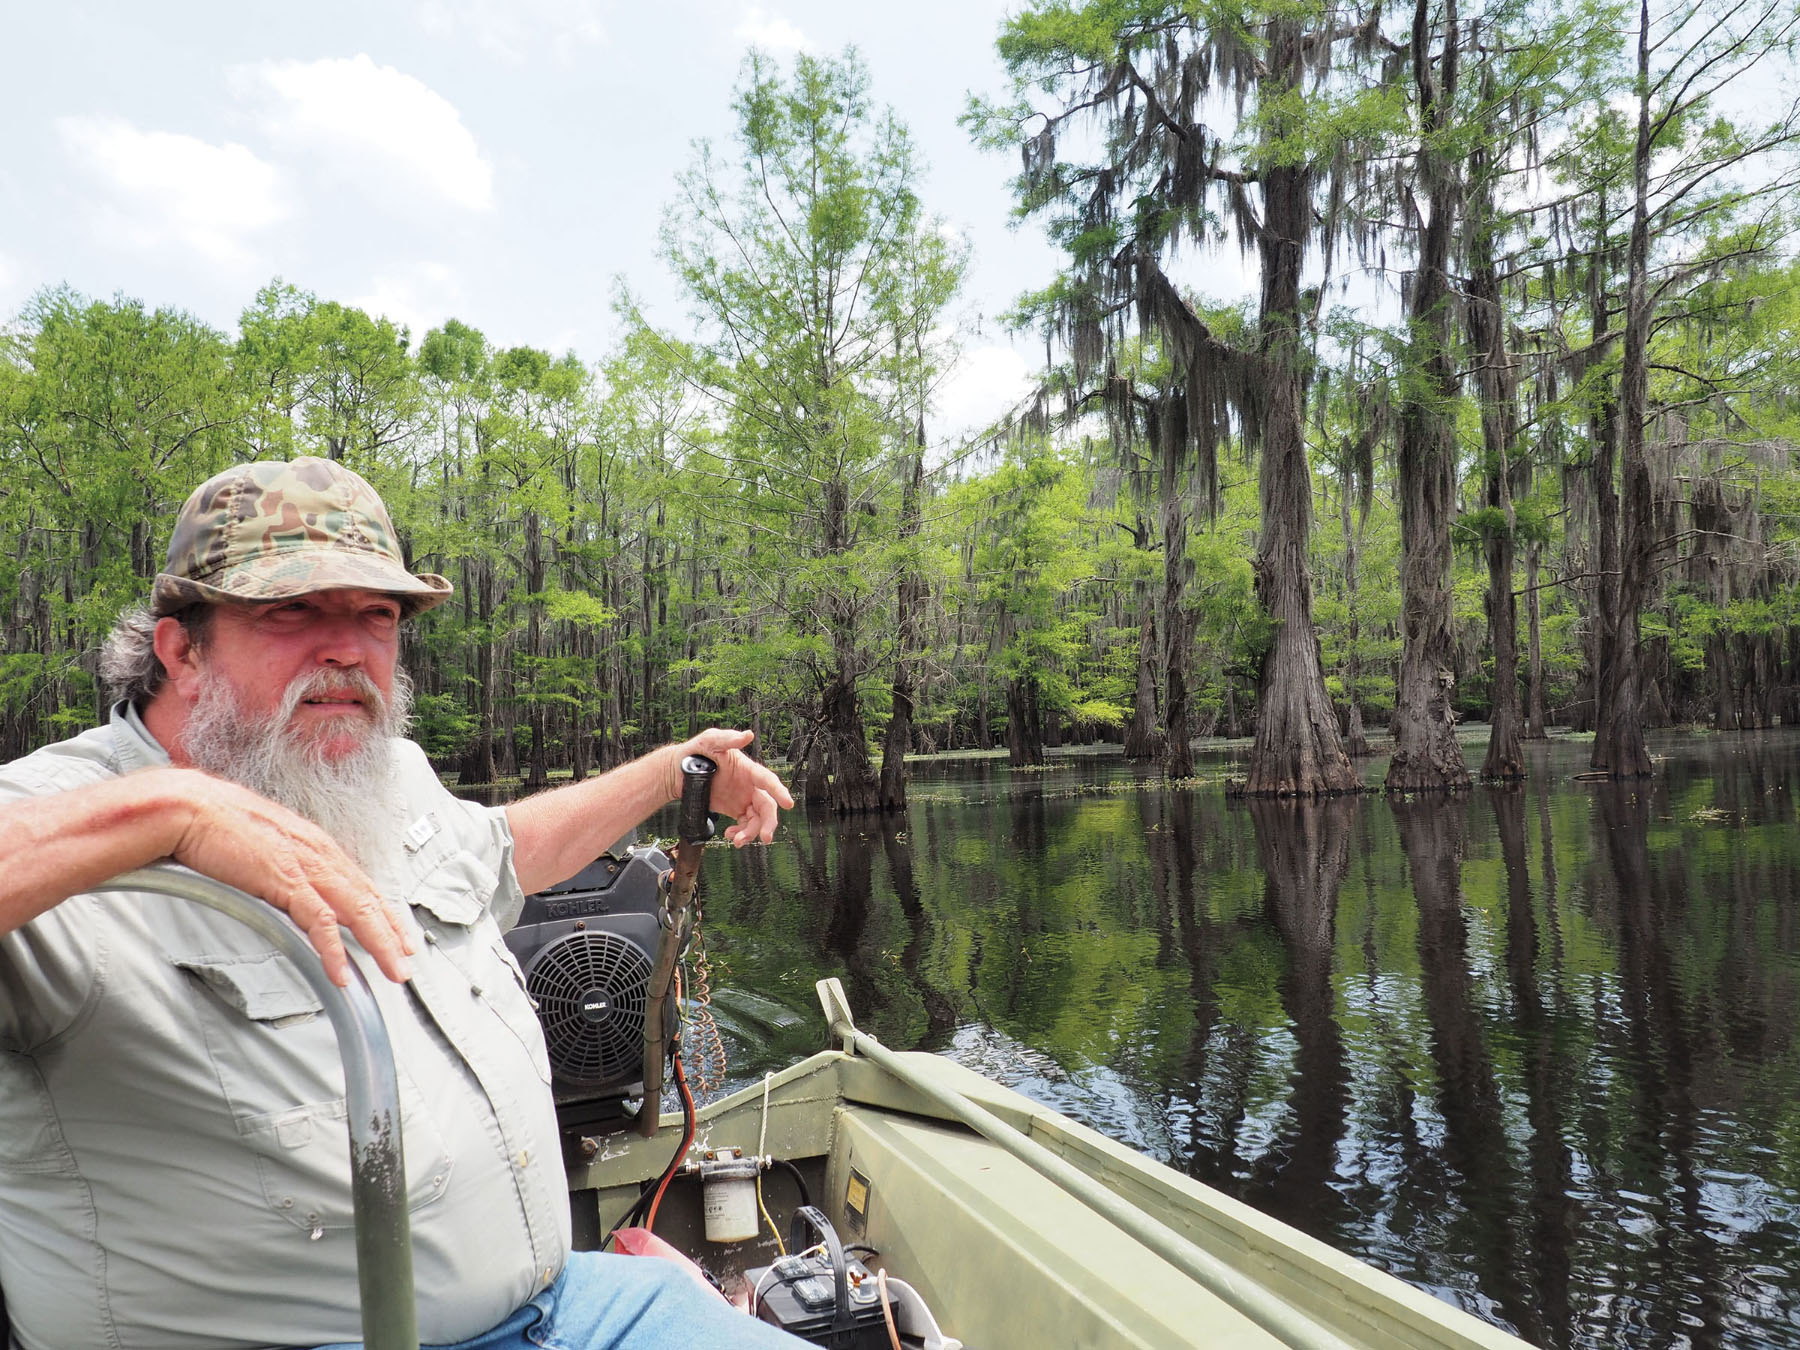 In a camoflauge hat and big beared, John Winn steers from the back of his boat tour on Caddo Lake Texas